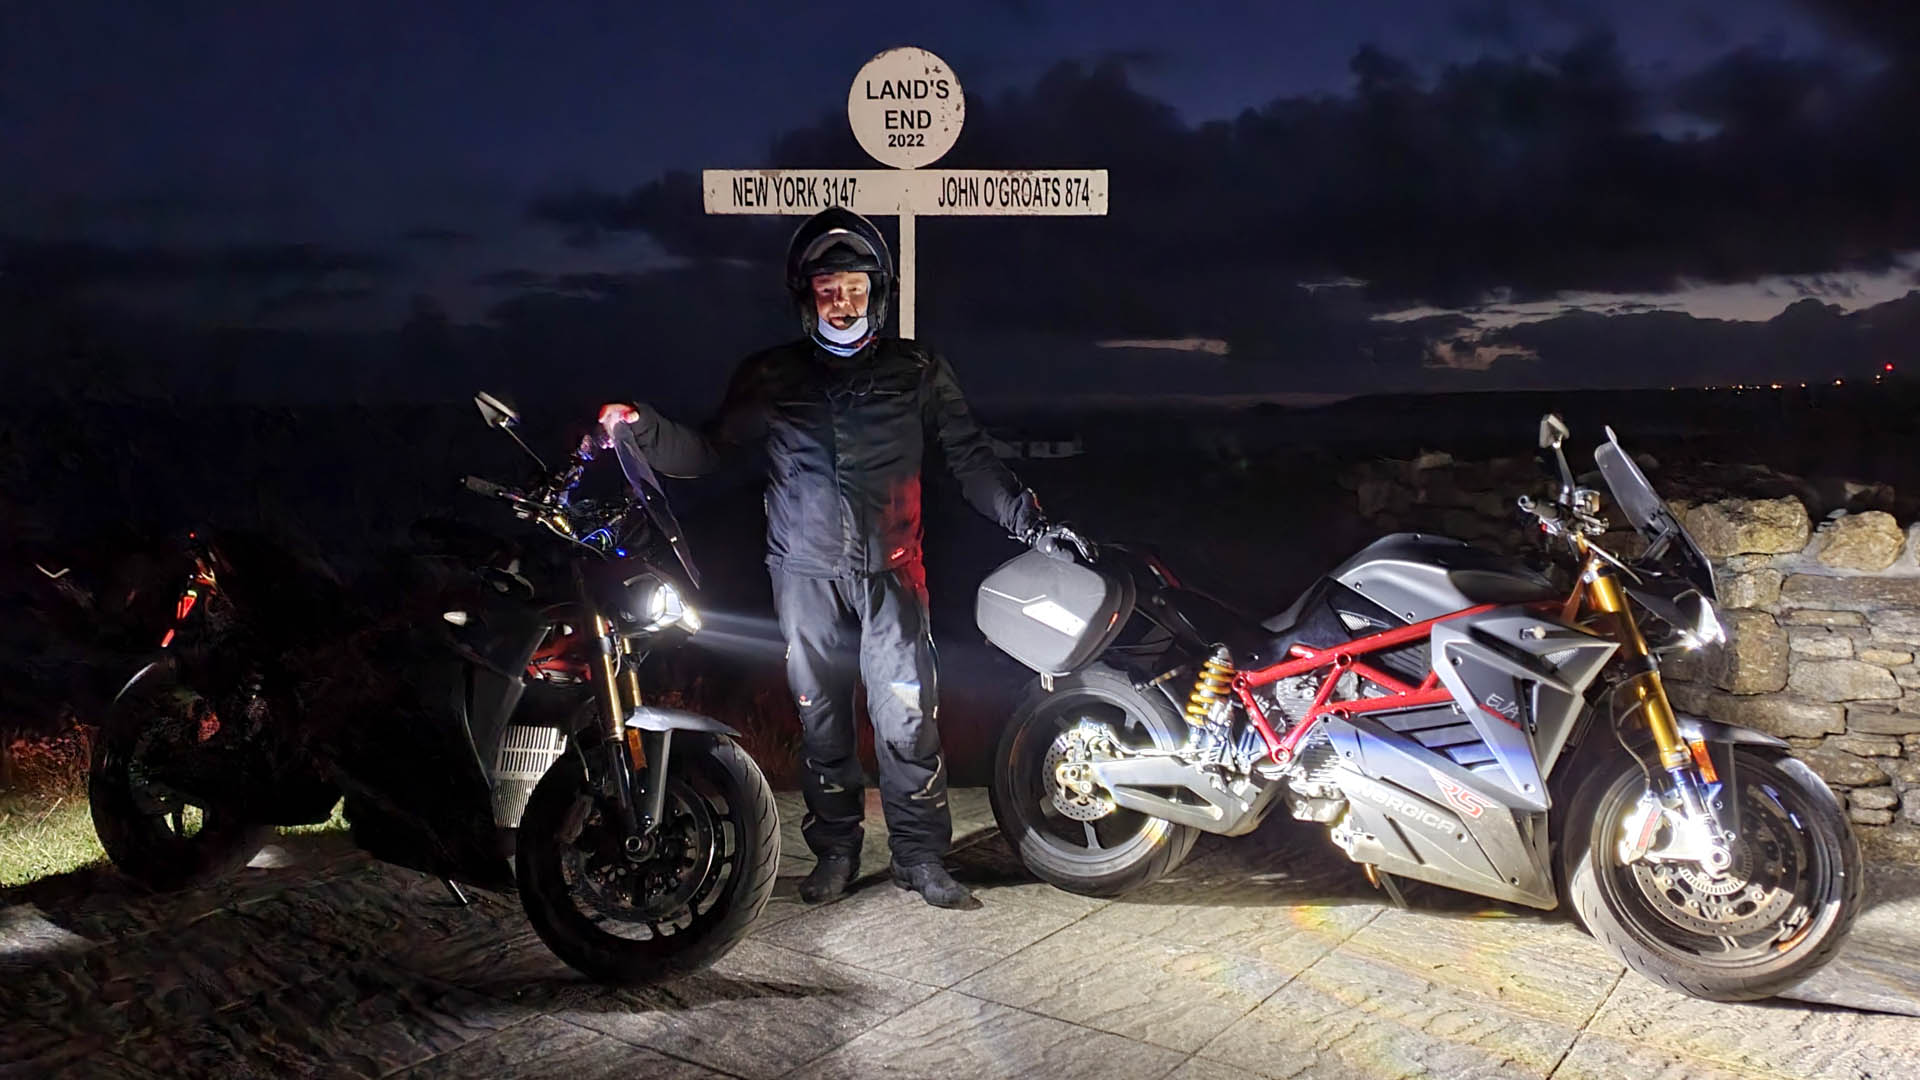 John with his Energica EVA Ribelle and the Energica EVA Ribelle RS edition James rode. At Land's End, approximately 03:30 on Monday 13th June, 2022.